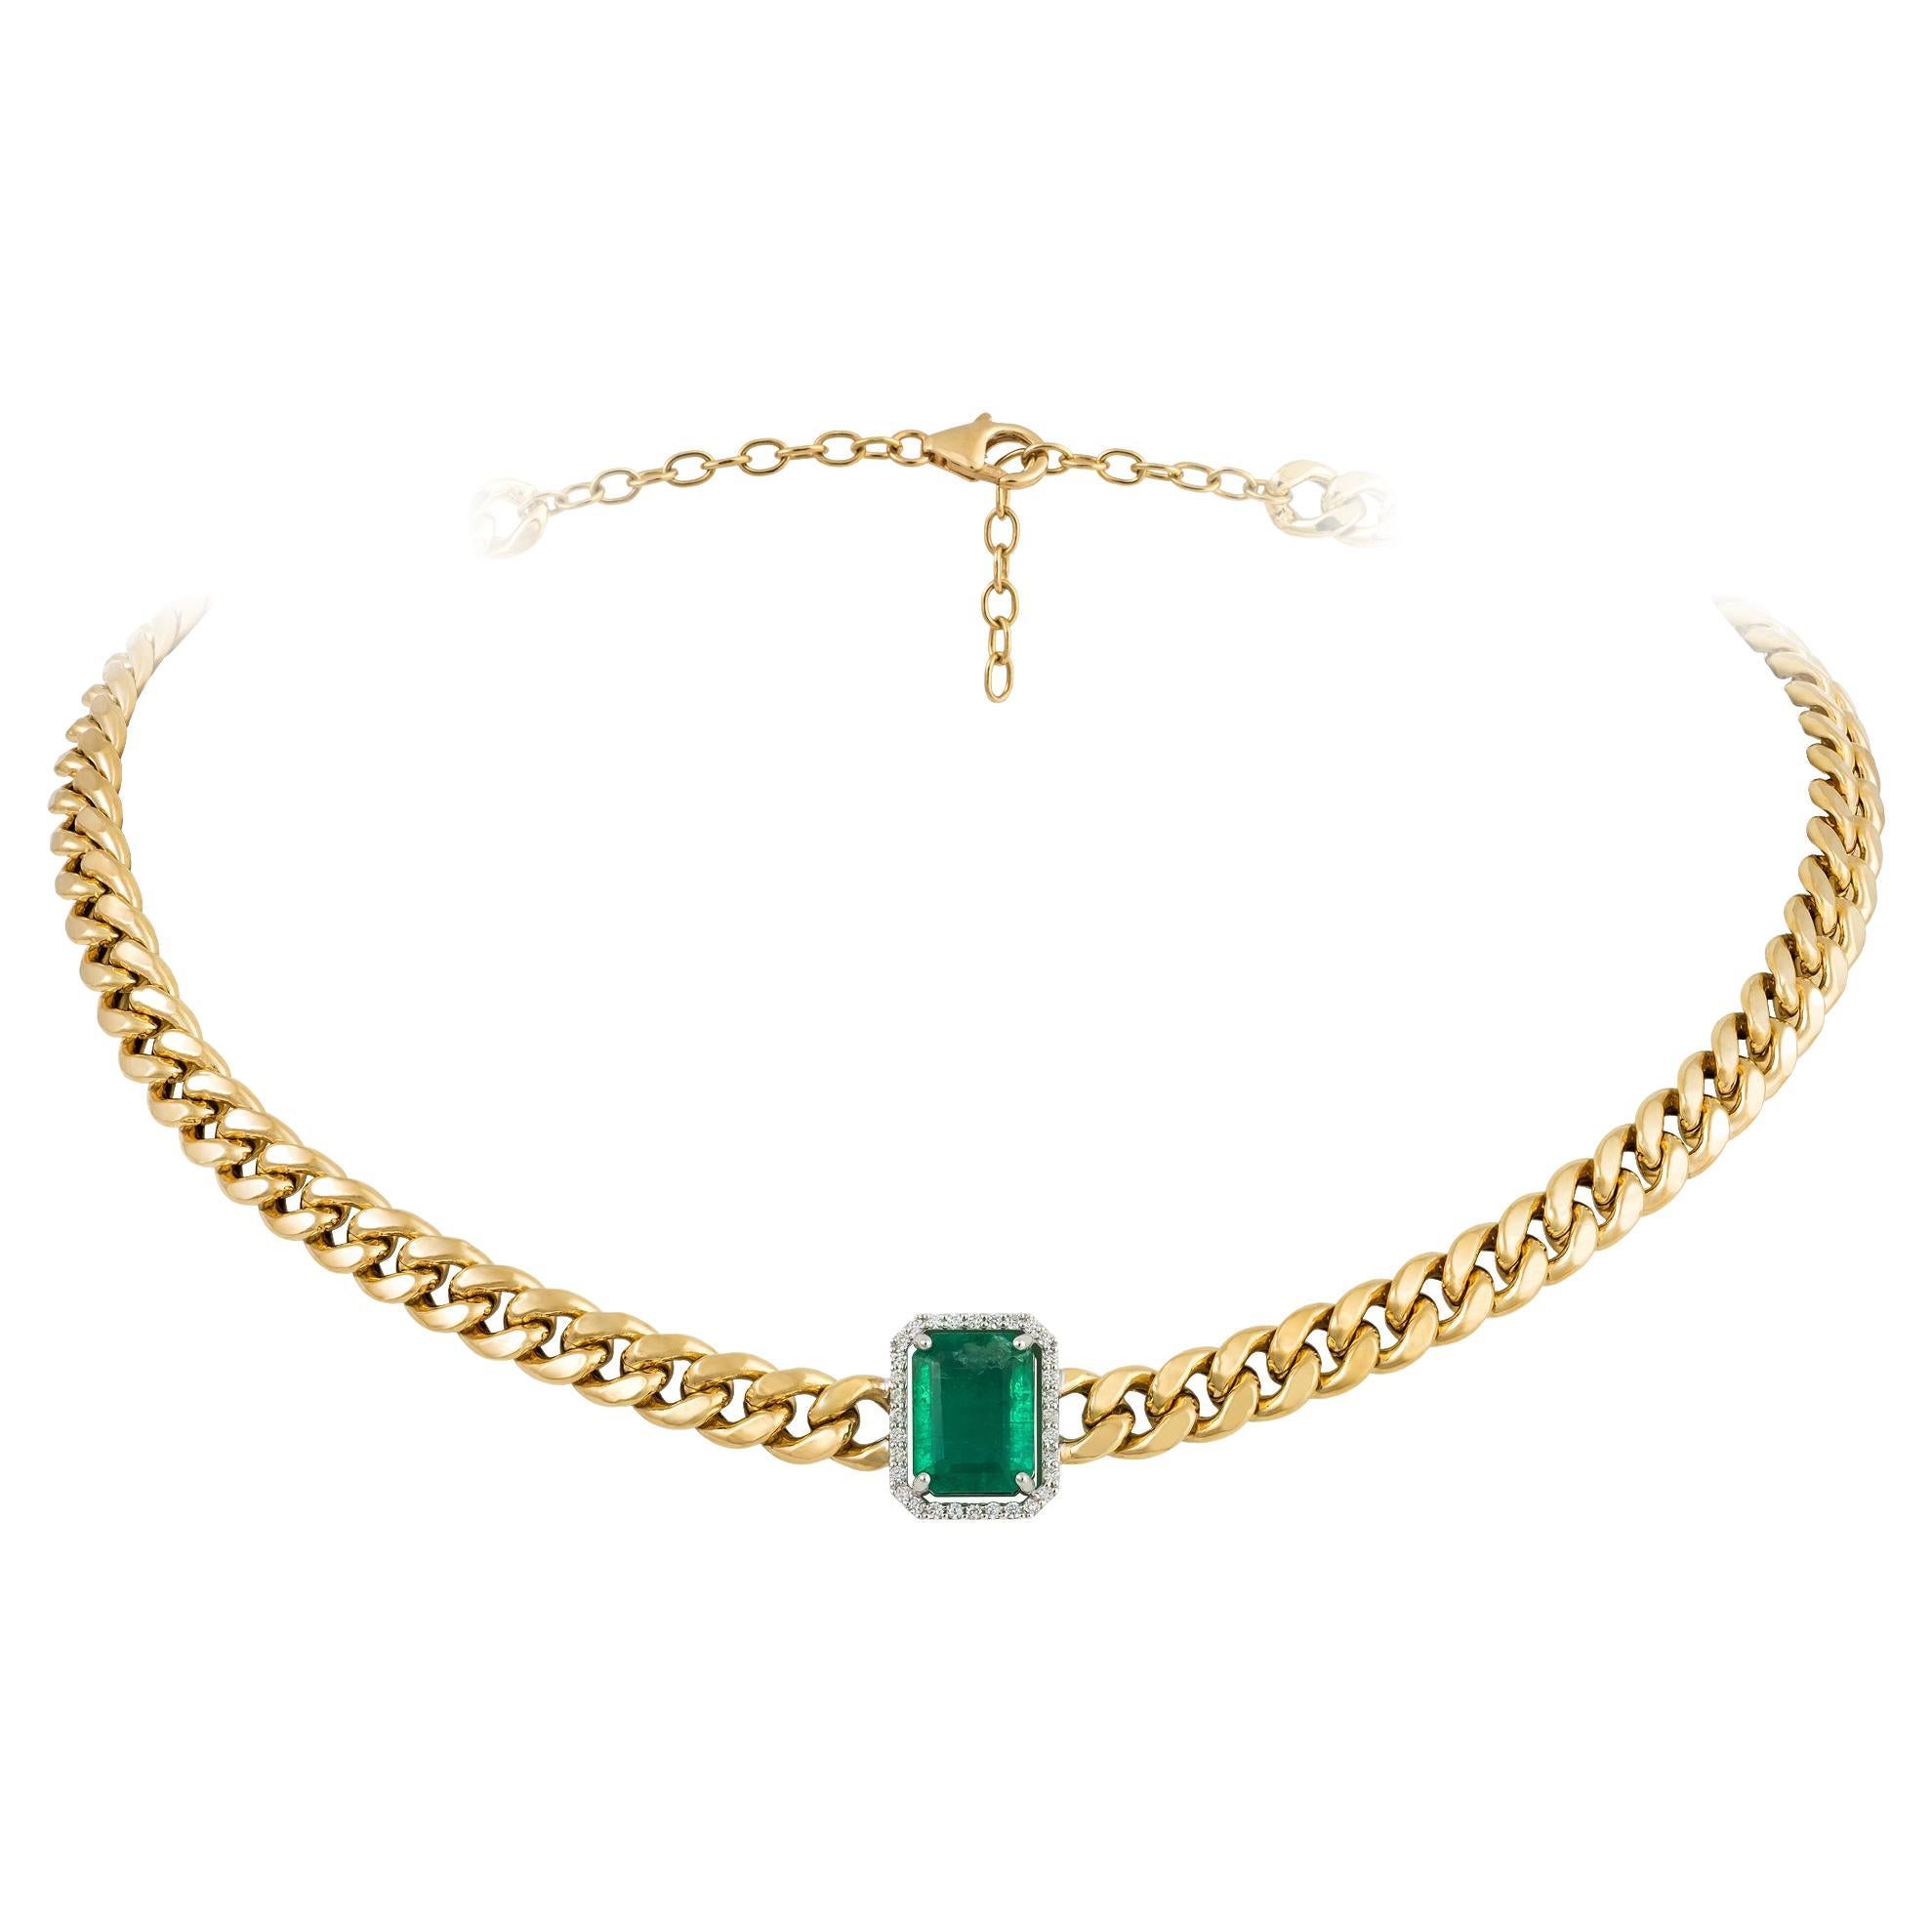 Chain White Yellow Gold 18K Necklace Emerald Diamond For Her For Sale